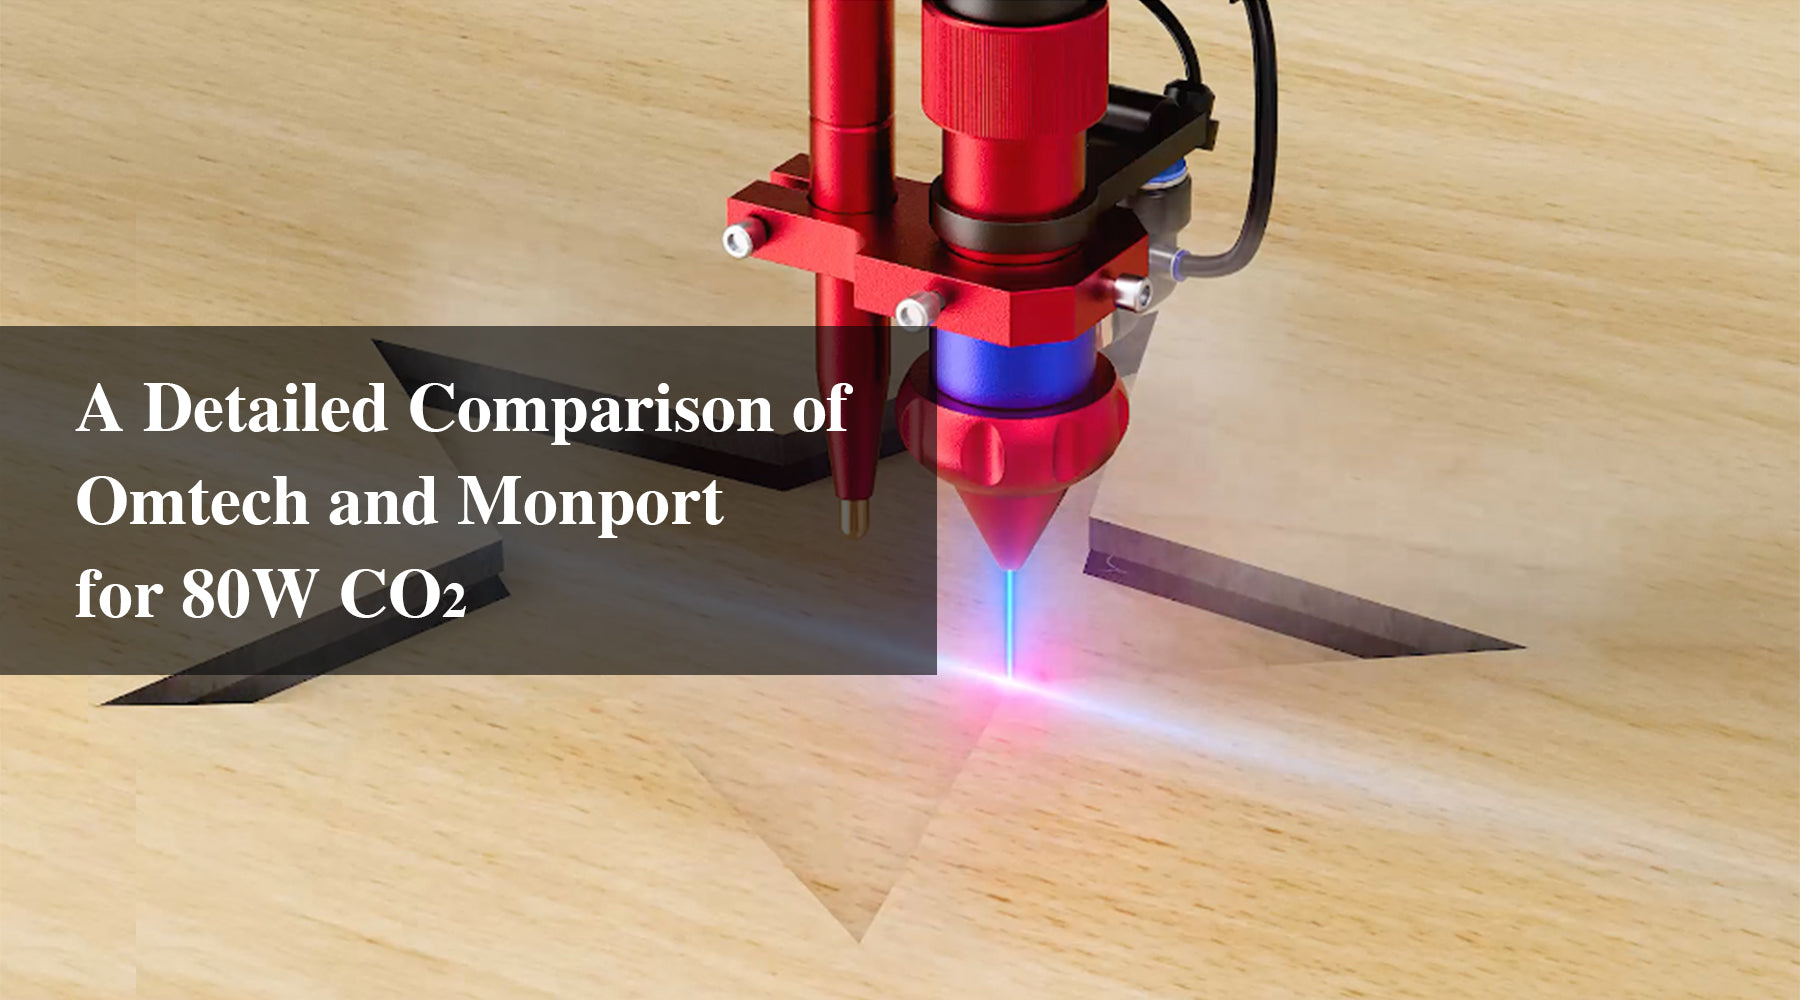 A Detailed Comparison of Omtech and Monport for 80W CO2